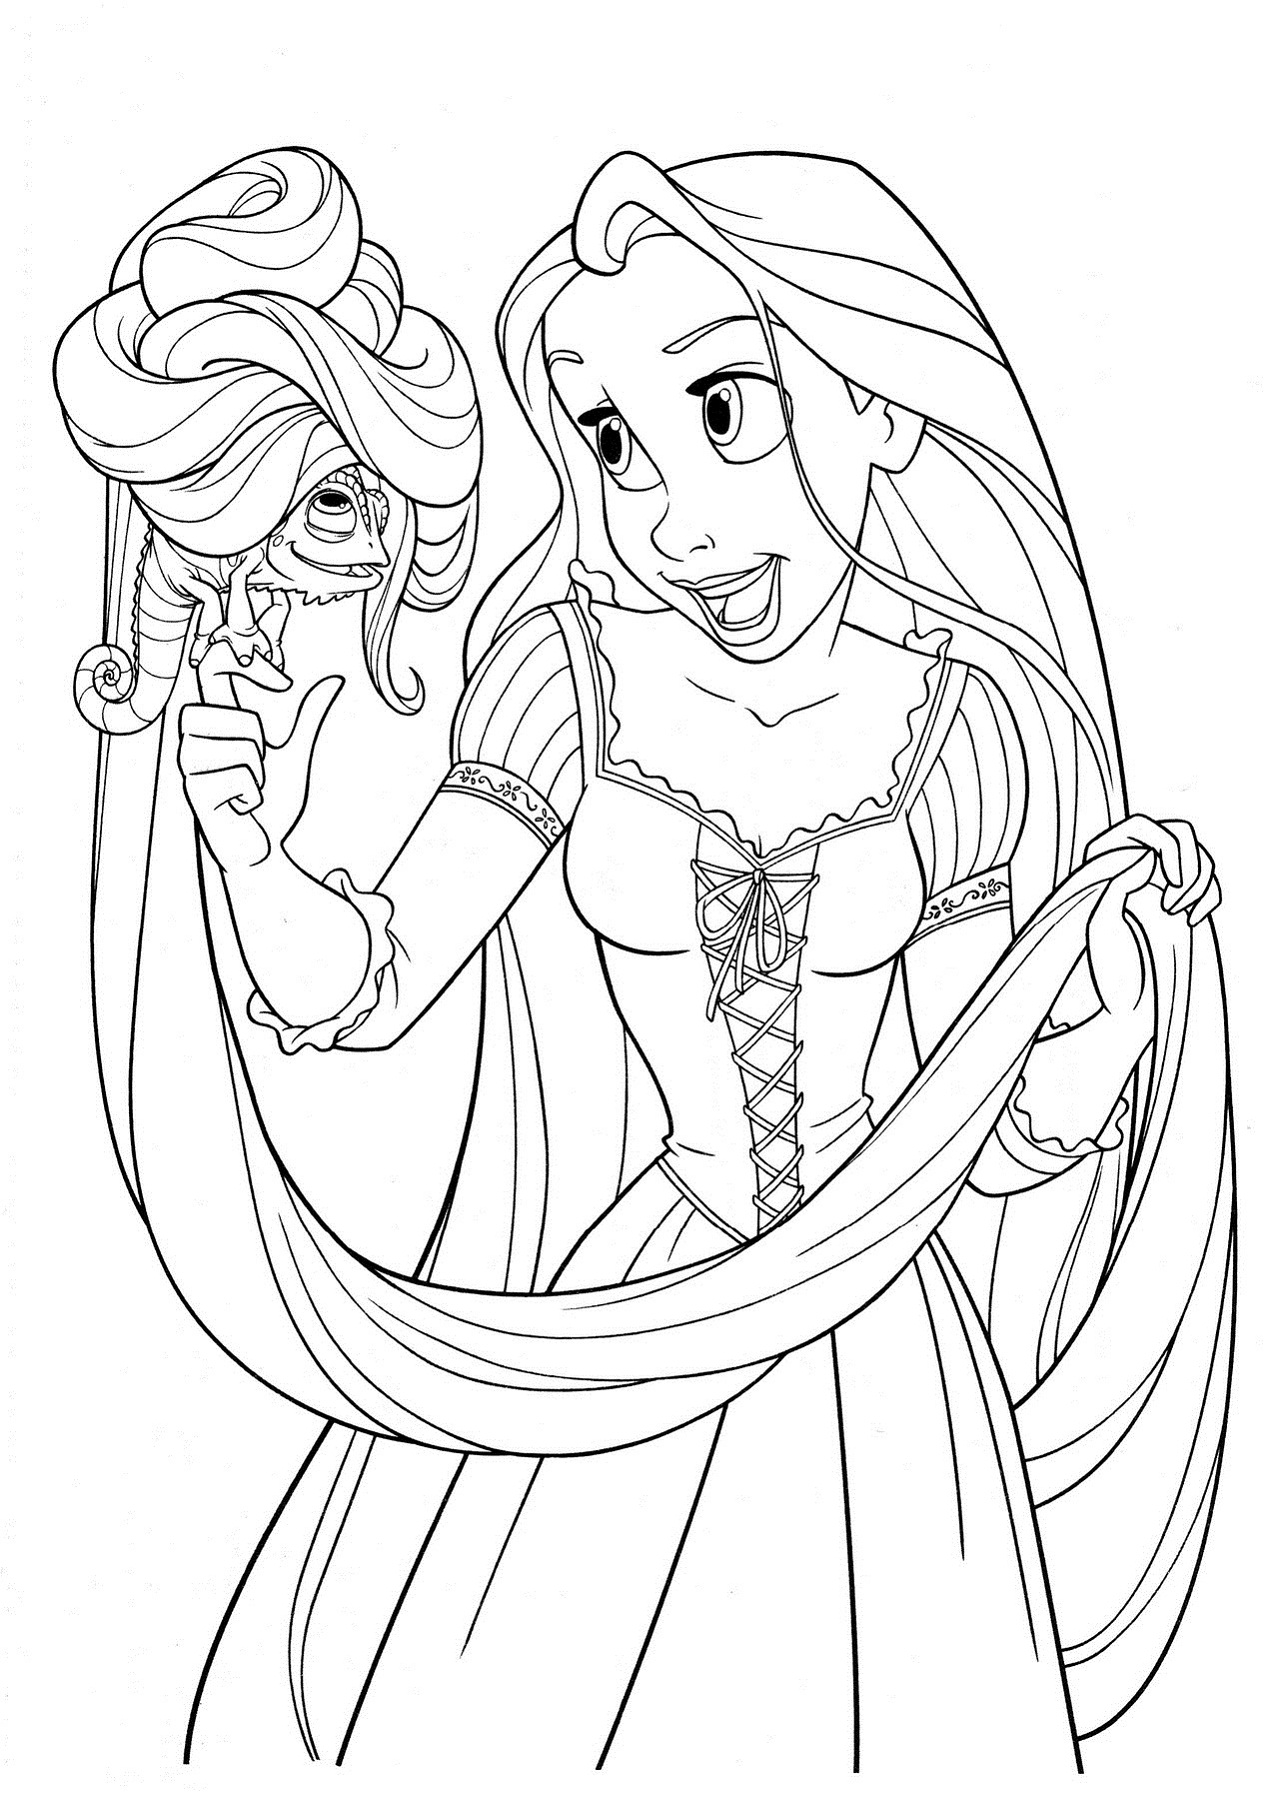 tangled-coloring-pages-printable-activity-shelter